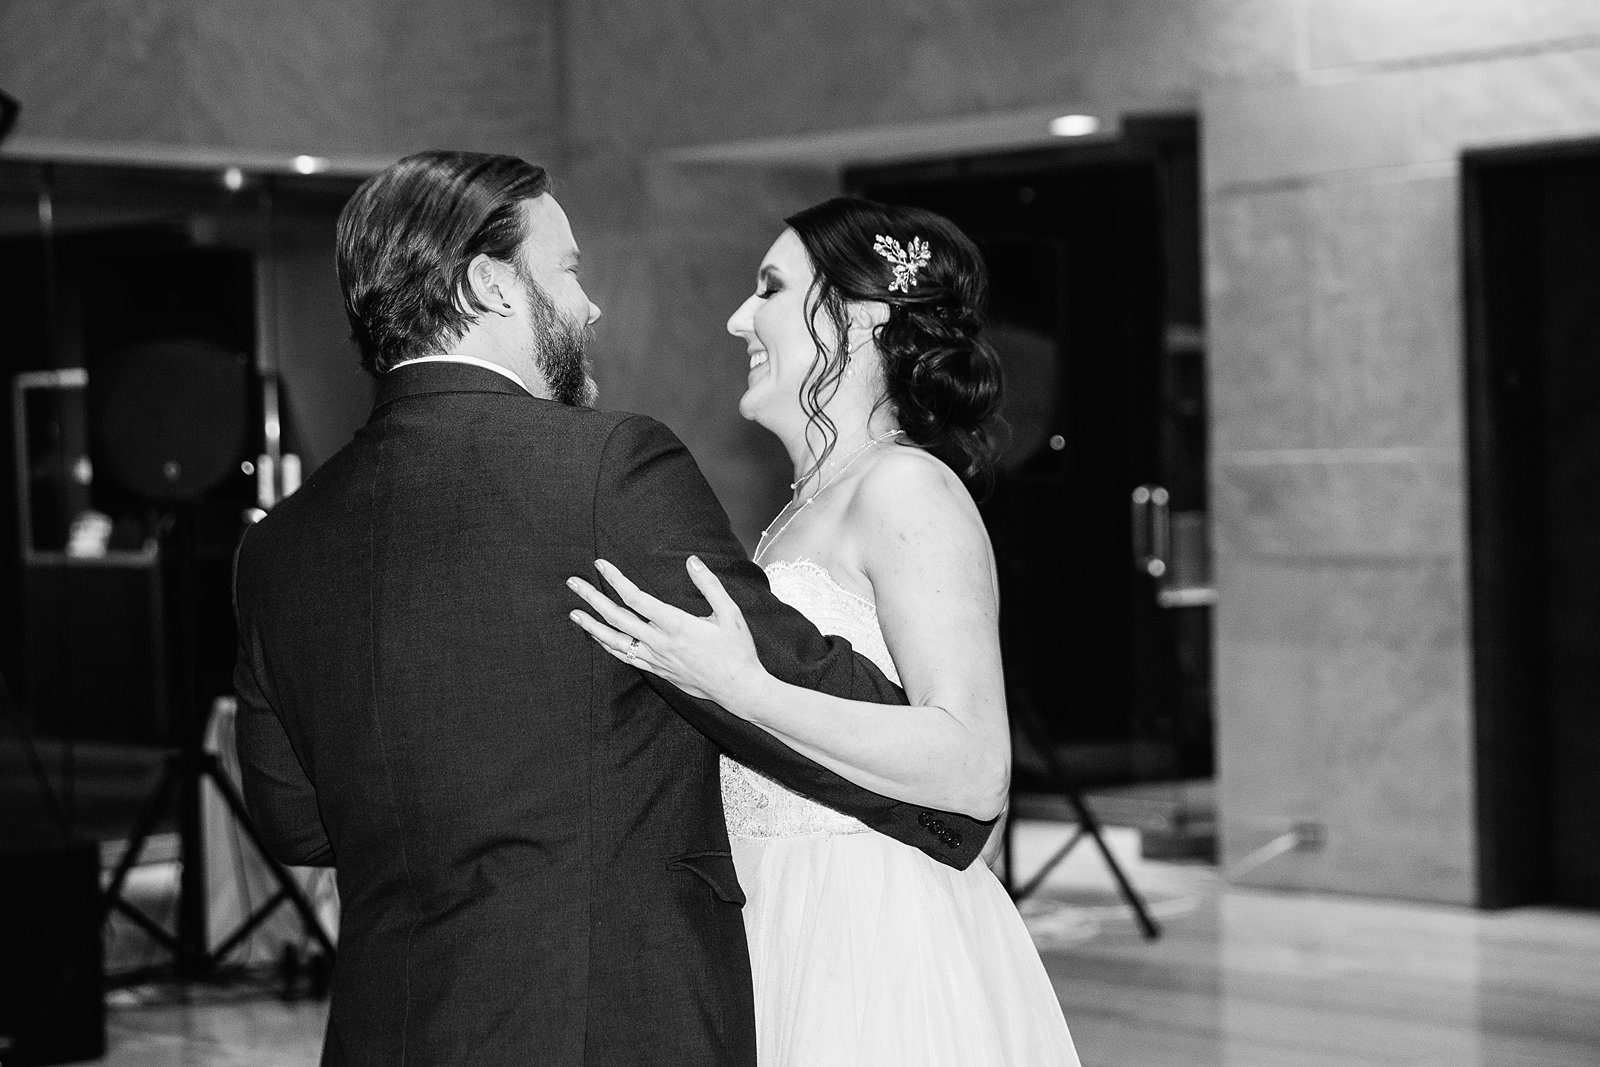 Bride and Groom sharing first dance at their Arizona Heritage Center at Papago Park wedding reception by Arizona wedding photographer PMA Photography.